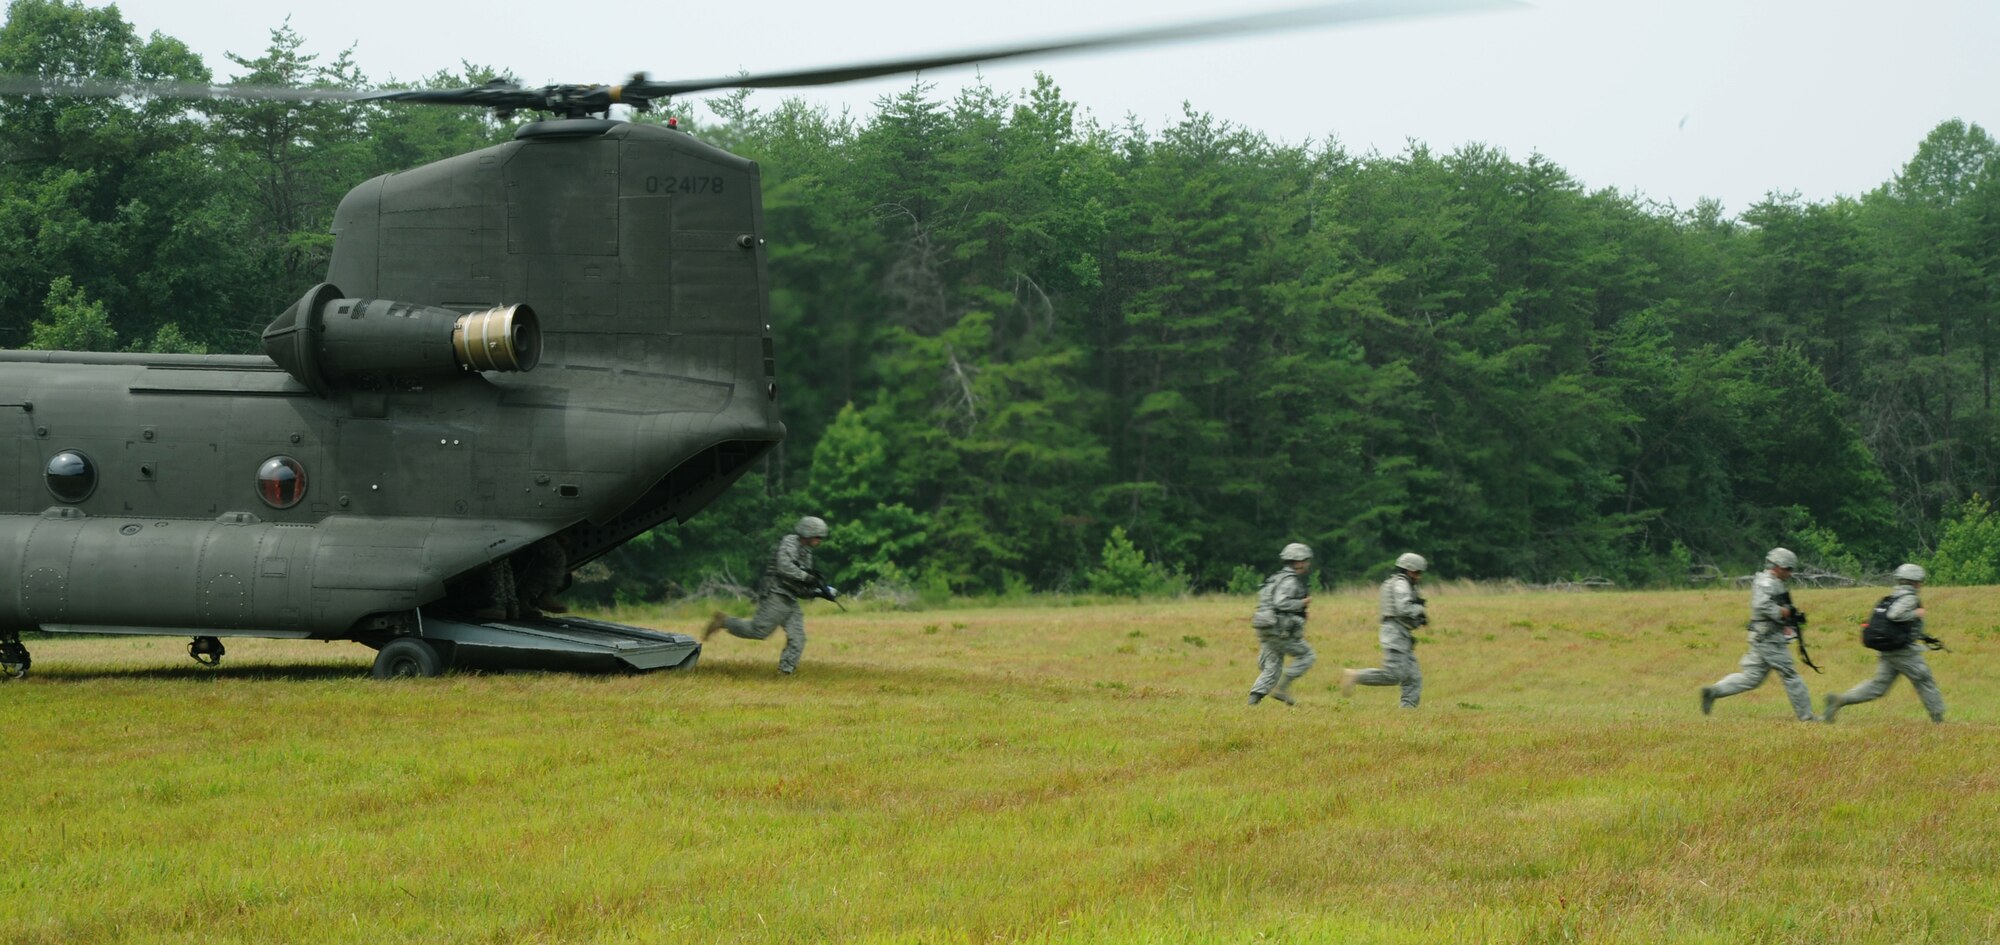 Members of the 11th Wing Security Forces Squadron and the 55th Signal Company unload from a U.S. Army CH-47 Chinook as they train for combat operations near Brandywine, Md. July 19.  Members of the 89th Communications Squadron from Joint Base Andrews and 579th Medical Group from Joint Base Annacostia-Bolling, Washington, D.C., also attended the training. (U.S. Air Force photo by Senior Airman Torey Griffith)